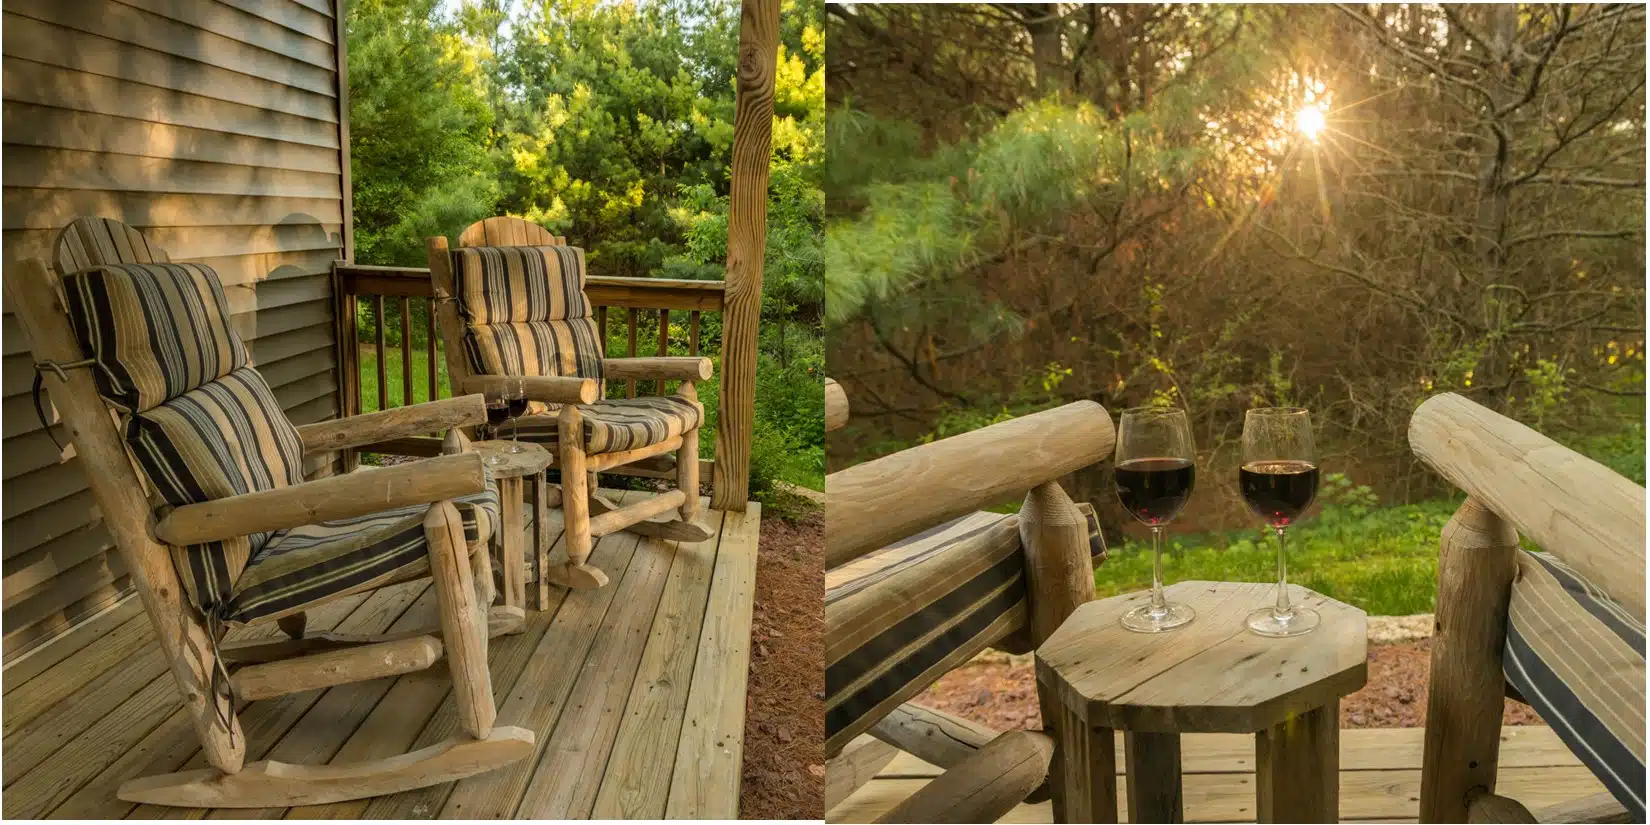 split picture with deck on left and setting sun and wine on right